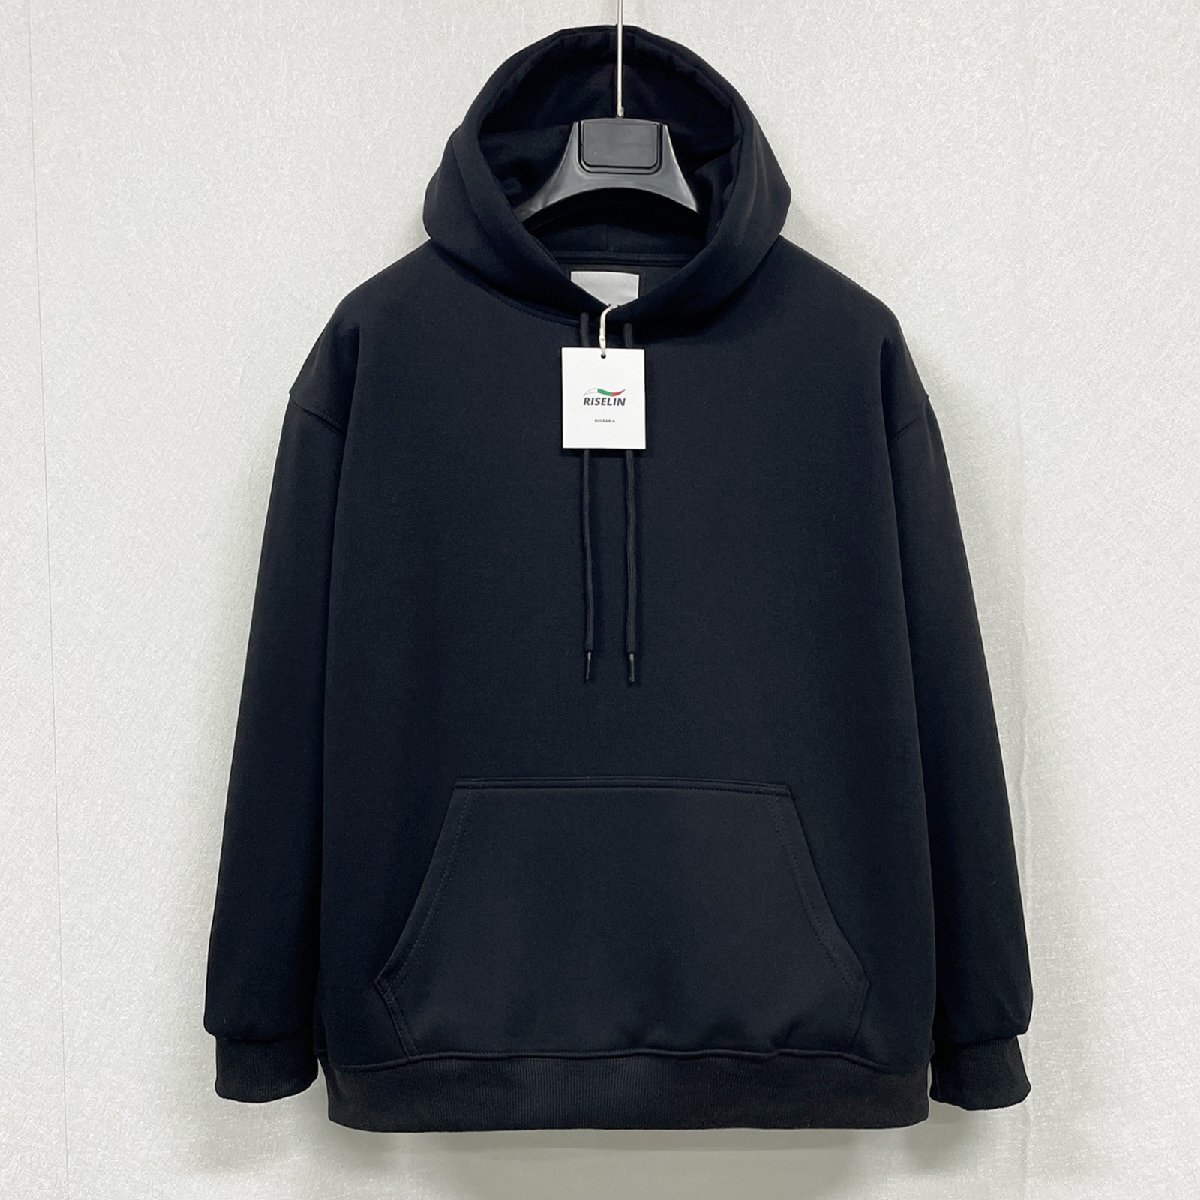  piece . Europe made * regular price 4 ten thousand * BVLGARY a departure *RISELIN Parker soft comfortable pull over tops simple Street usually put on L/48 size 